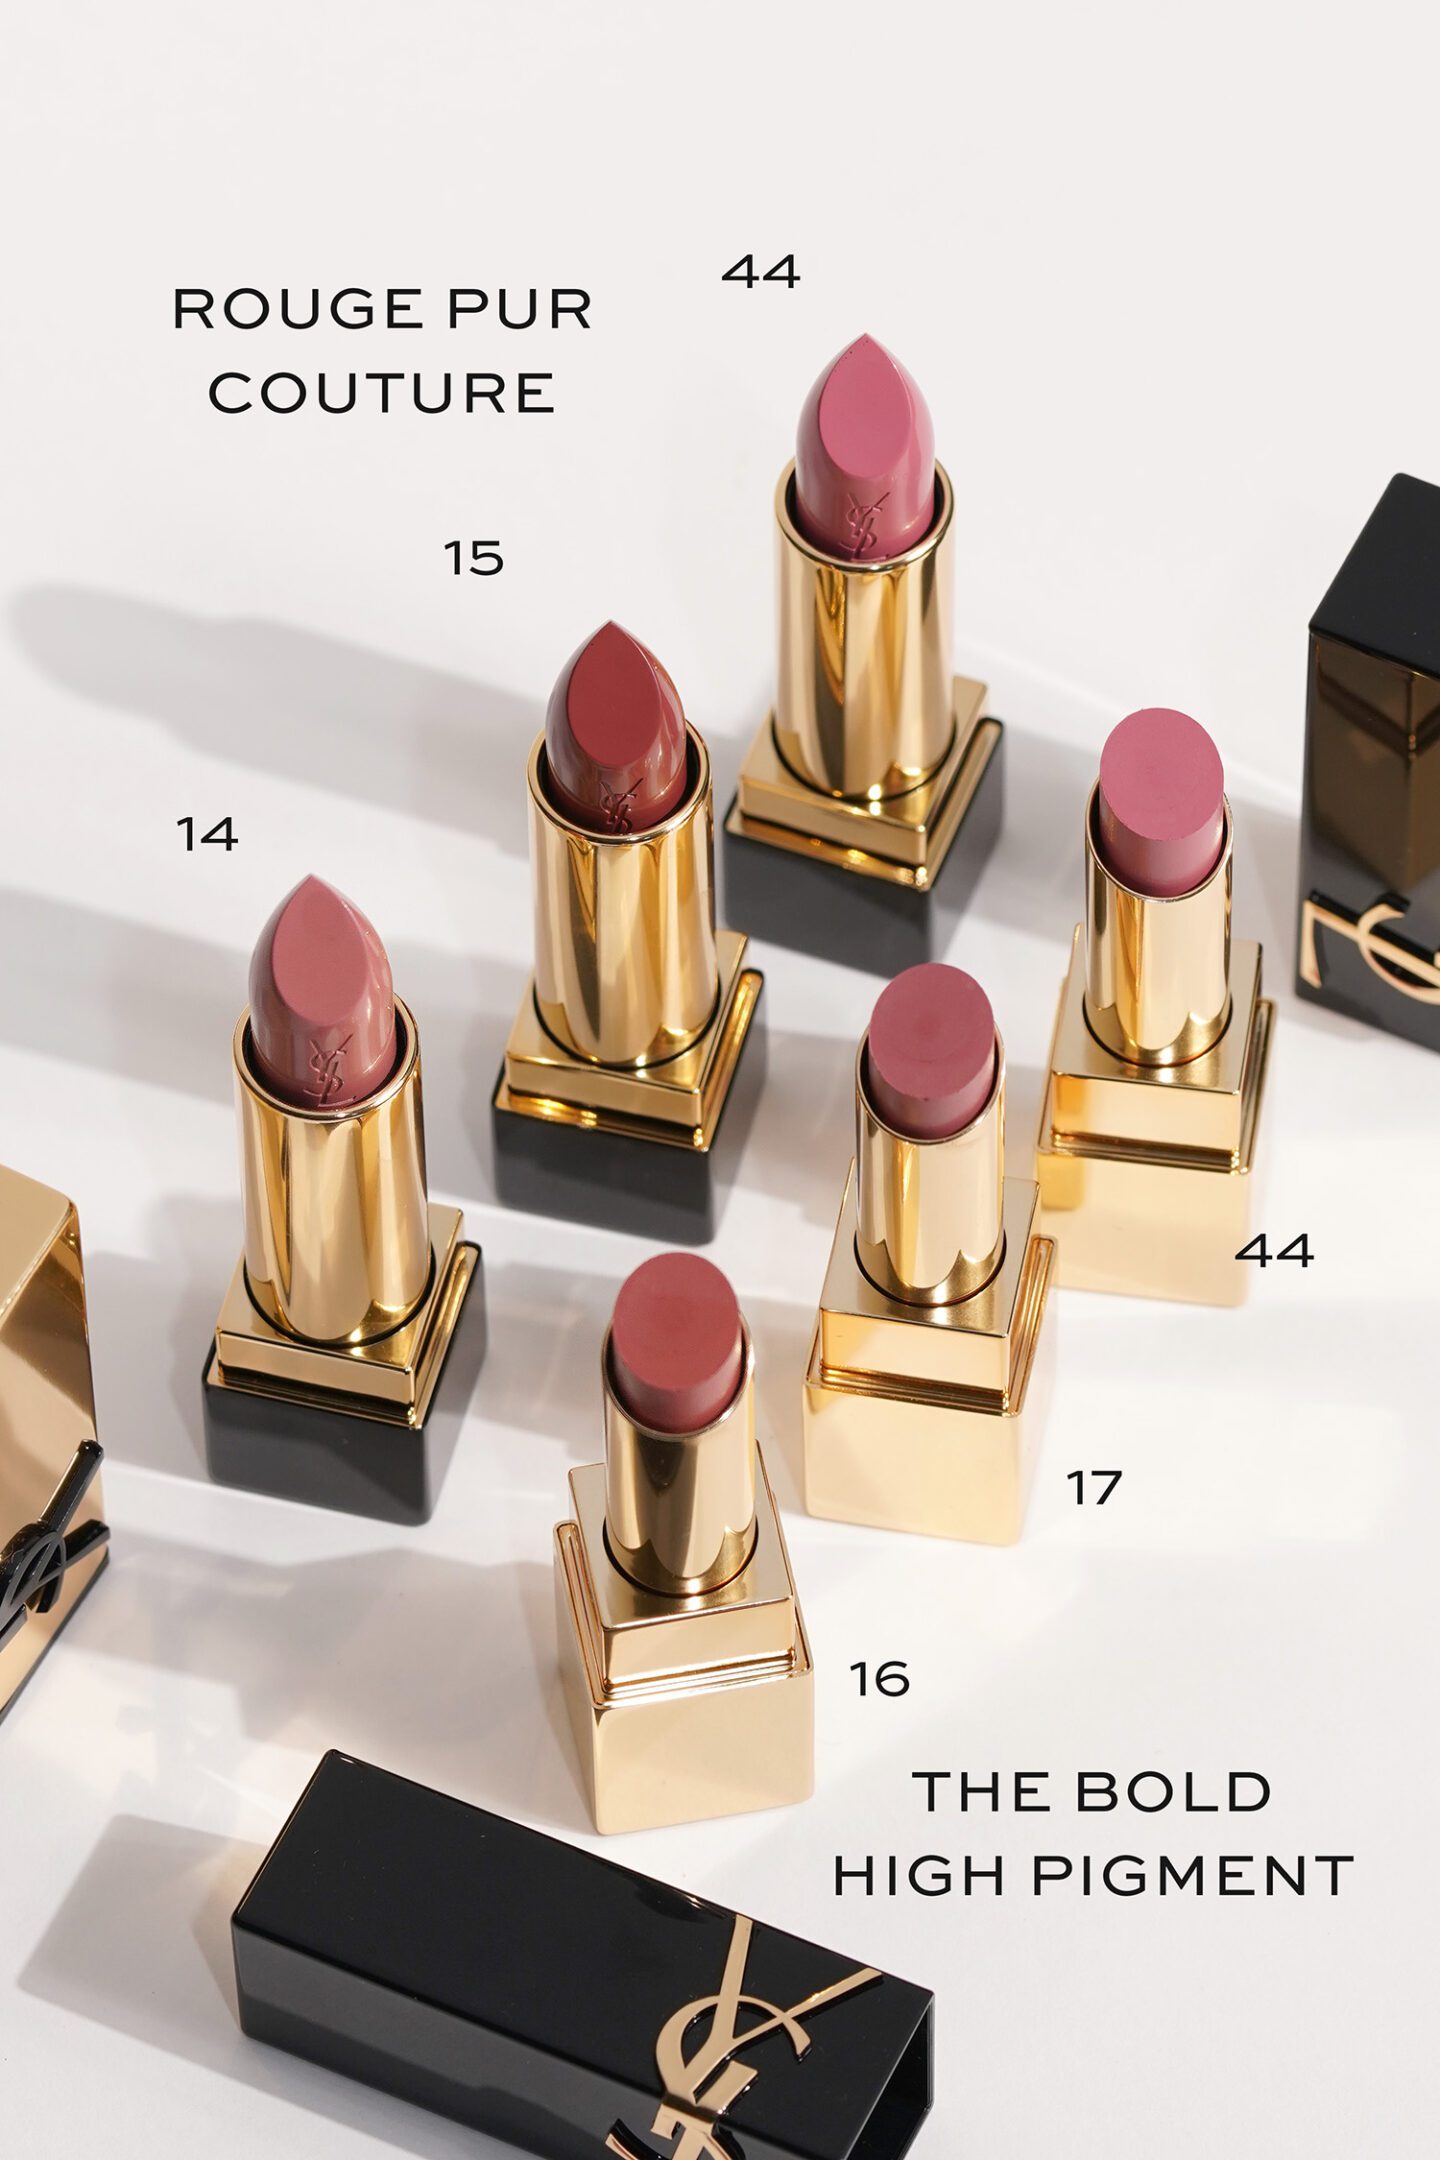 YSL Rouge Pur Couture and The Bold High Pigment new shades